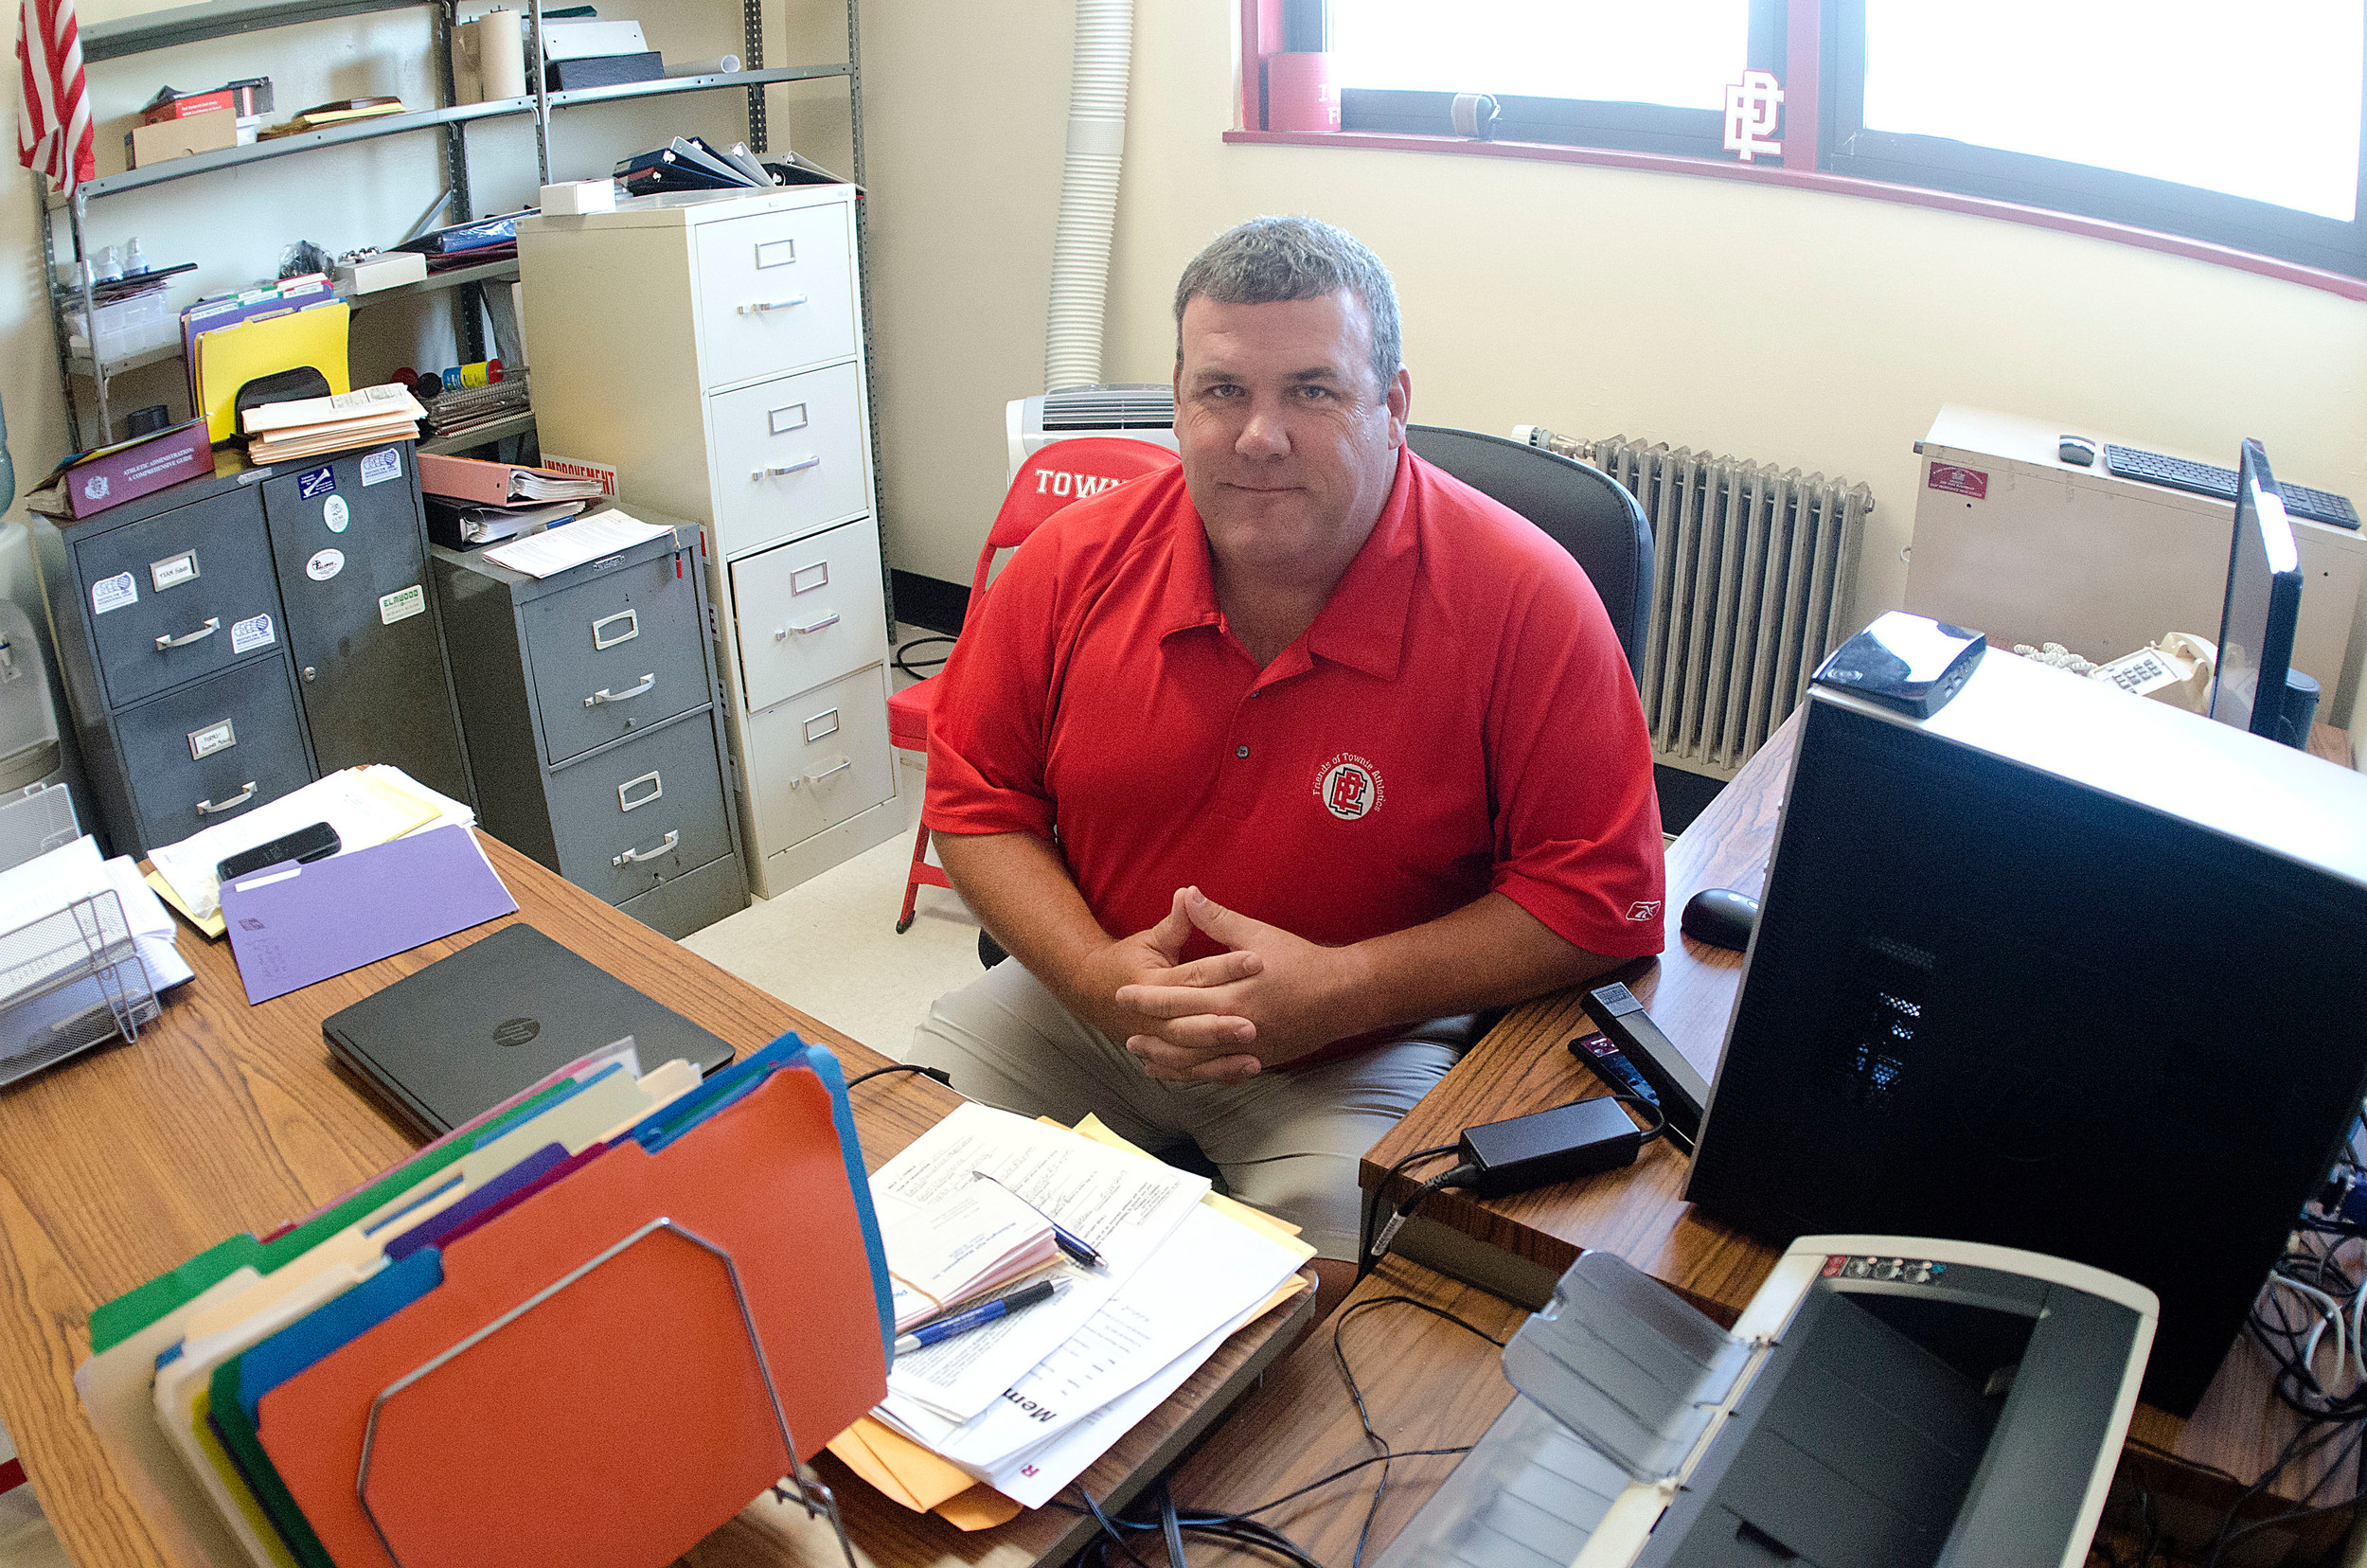 Mr. Amore started work in the athletic office last month.